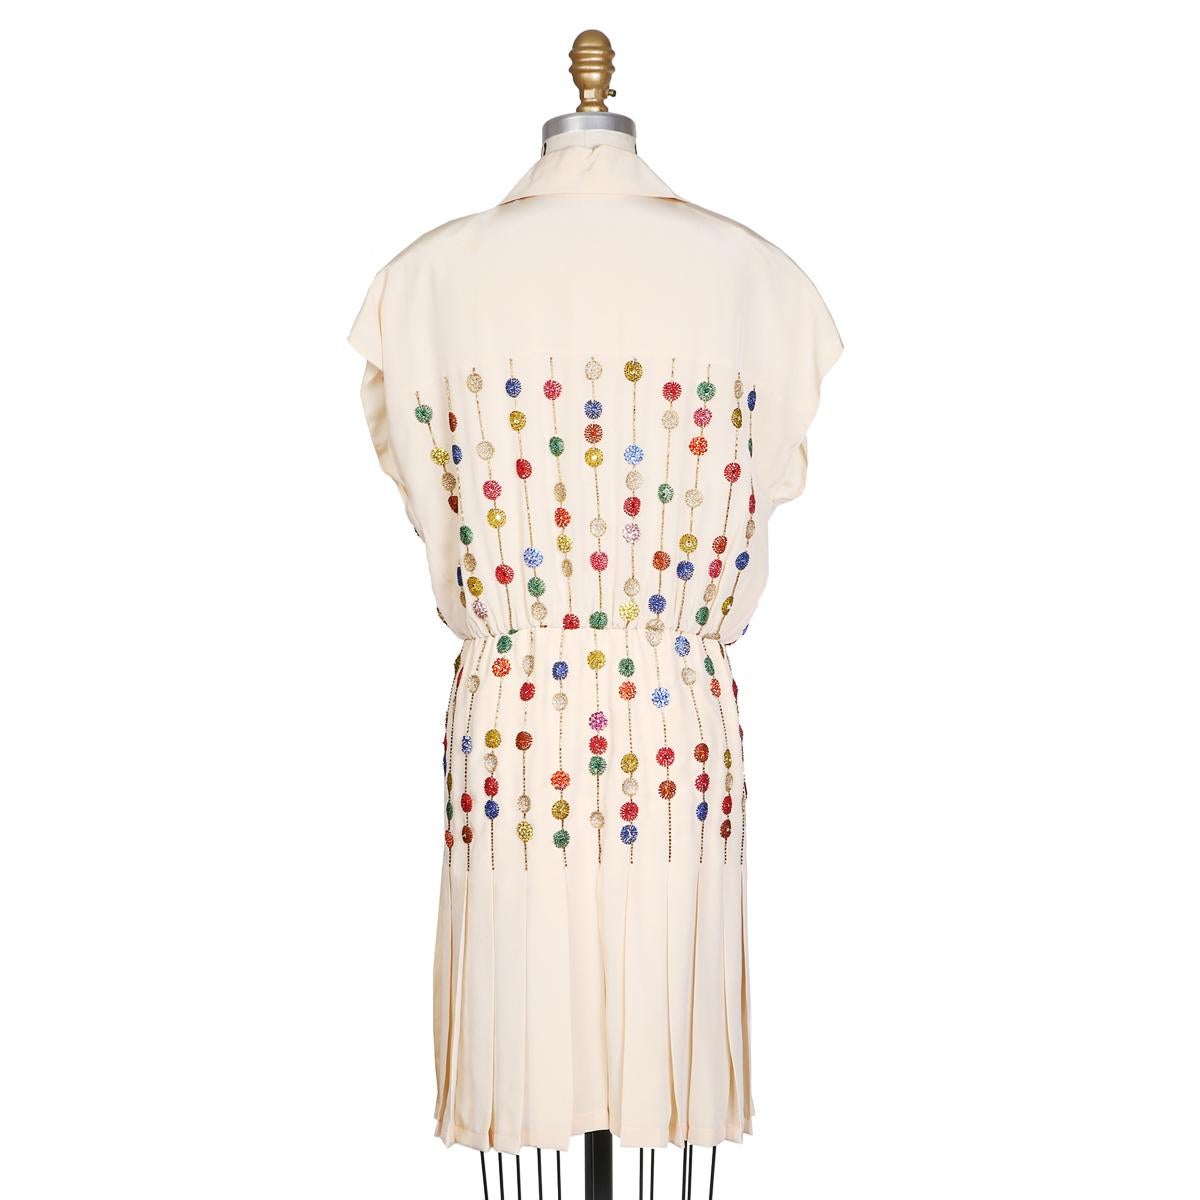 Vintage silk dress by Karl Lagerfeld for Chloe circa 1980s
Features cap sleeve and collar
Silk covered buttons closure in front
Beaded dots and lines design 
Pleating on skirt
Condition: Great vintage condition, missing tag